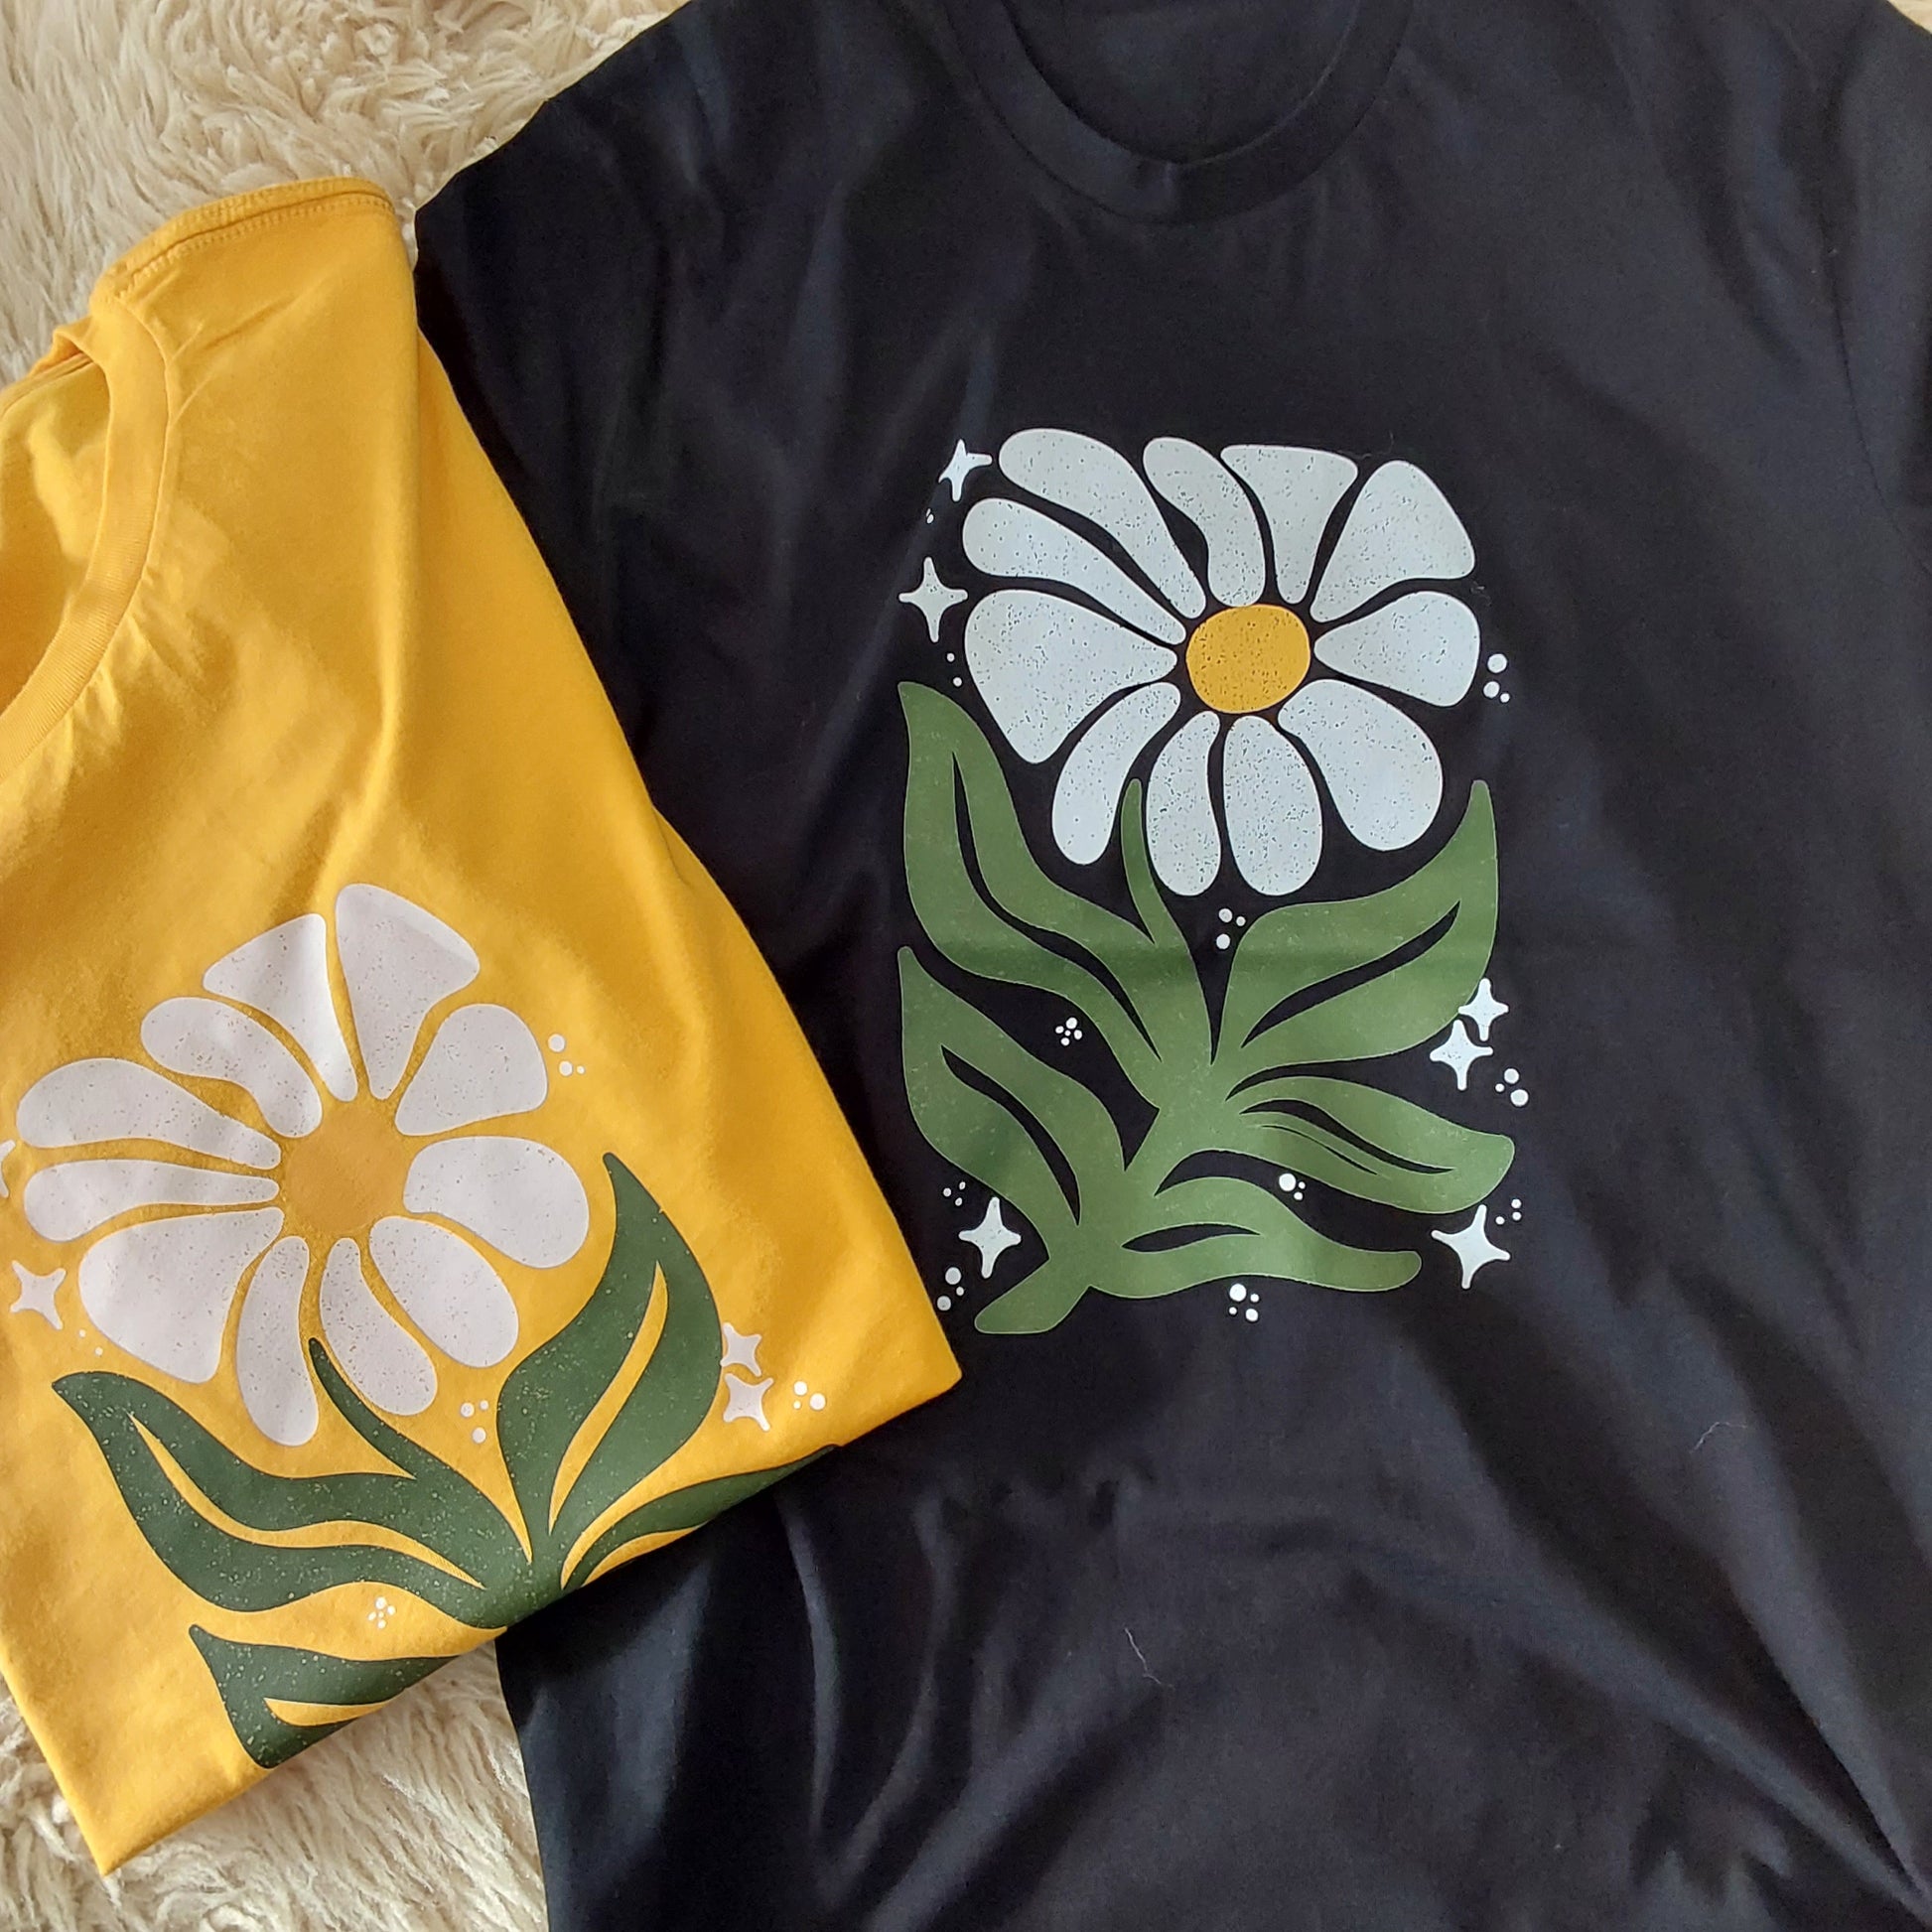 Organic cotton tshirts with boho abstract printed flowers